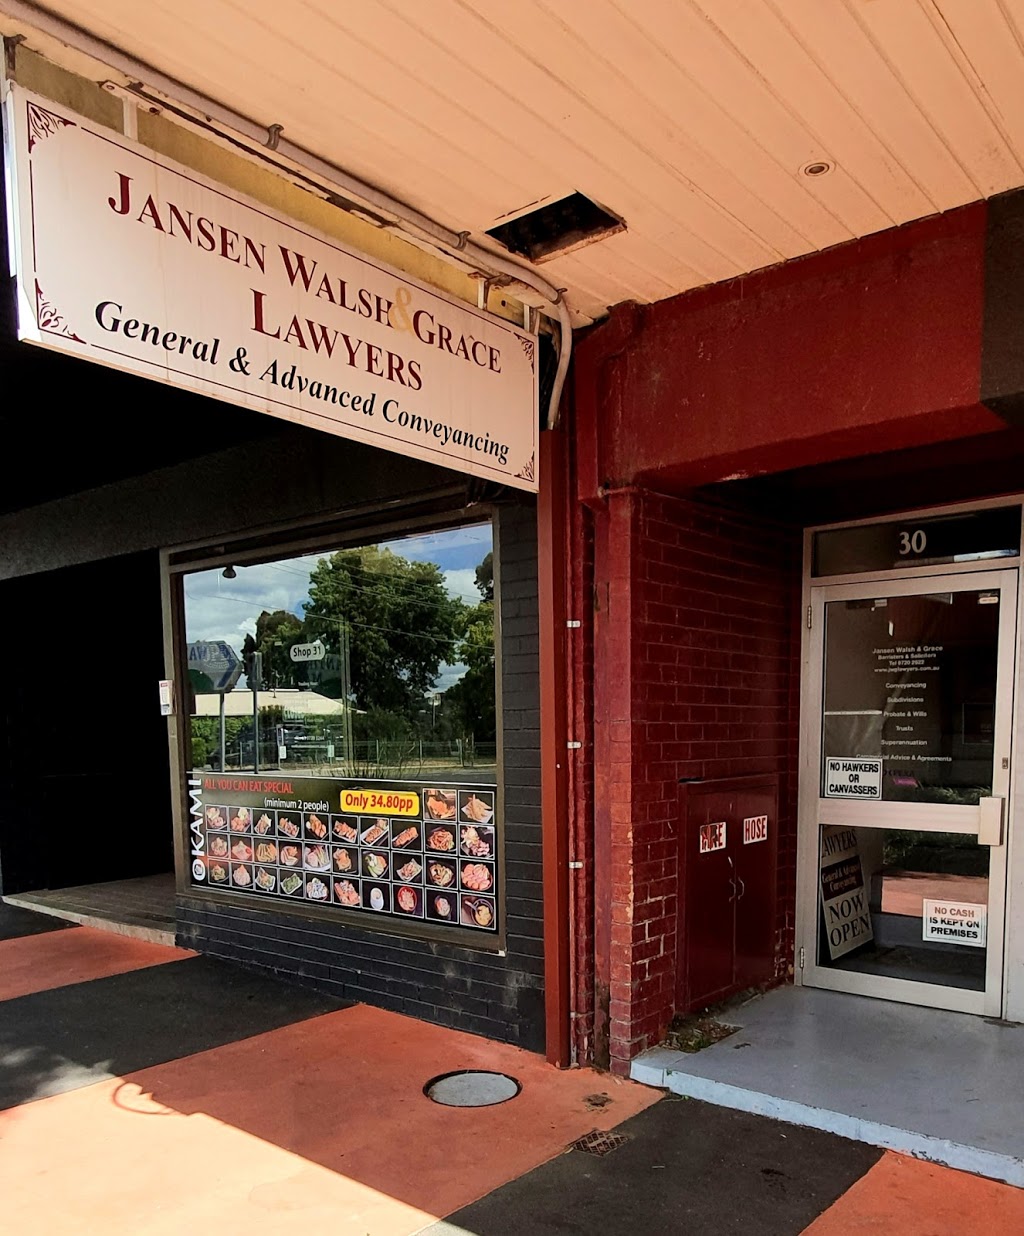 Jansen Walsh & Grace Conveyancing and Commercial Lawyers | lawyer | Wantirna Mall, Suite 30/348 Mountain Hwy, Wantirna VIC 3152, Australia | 0397202922 OR +61 3 9720 2922